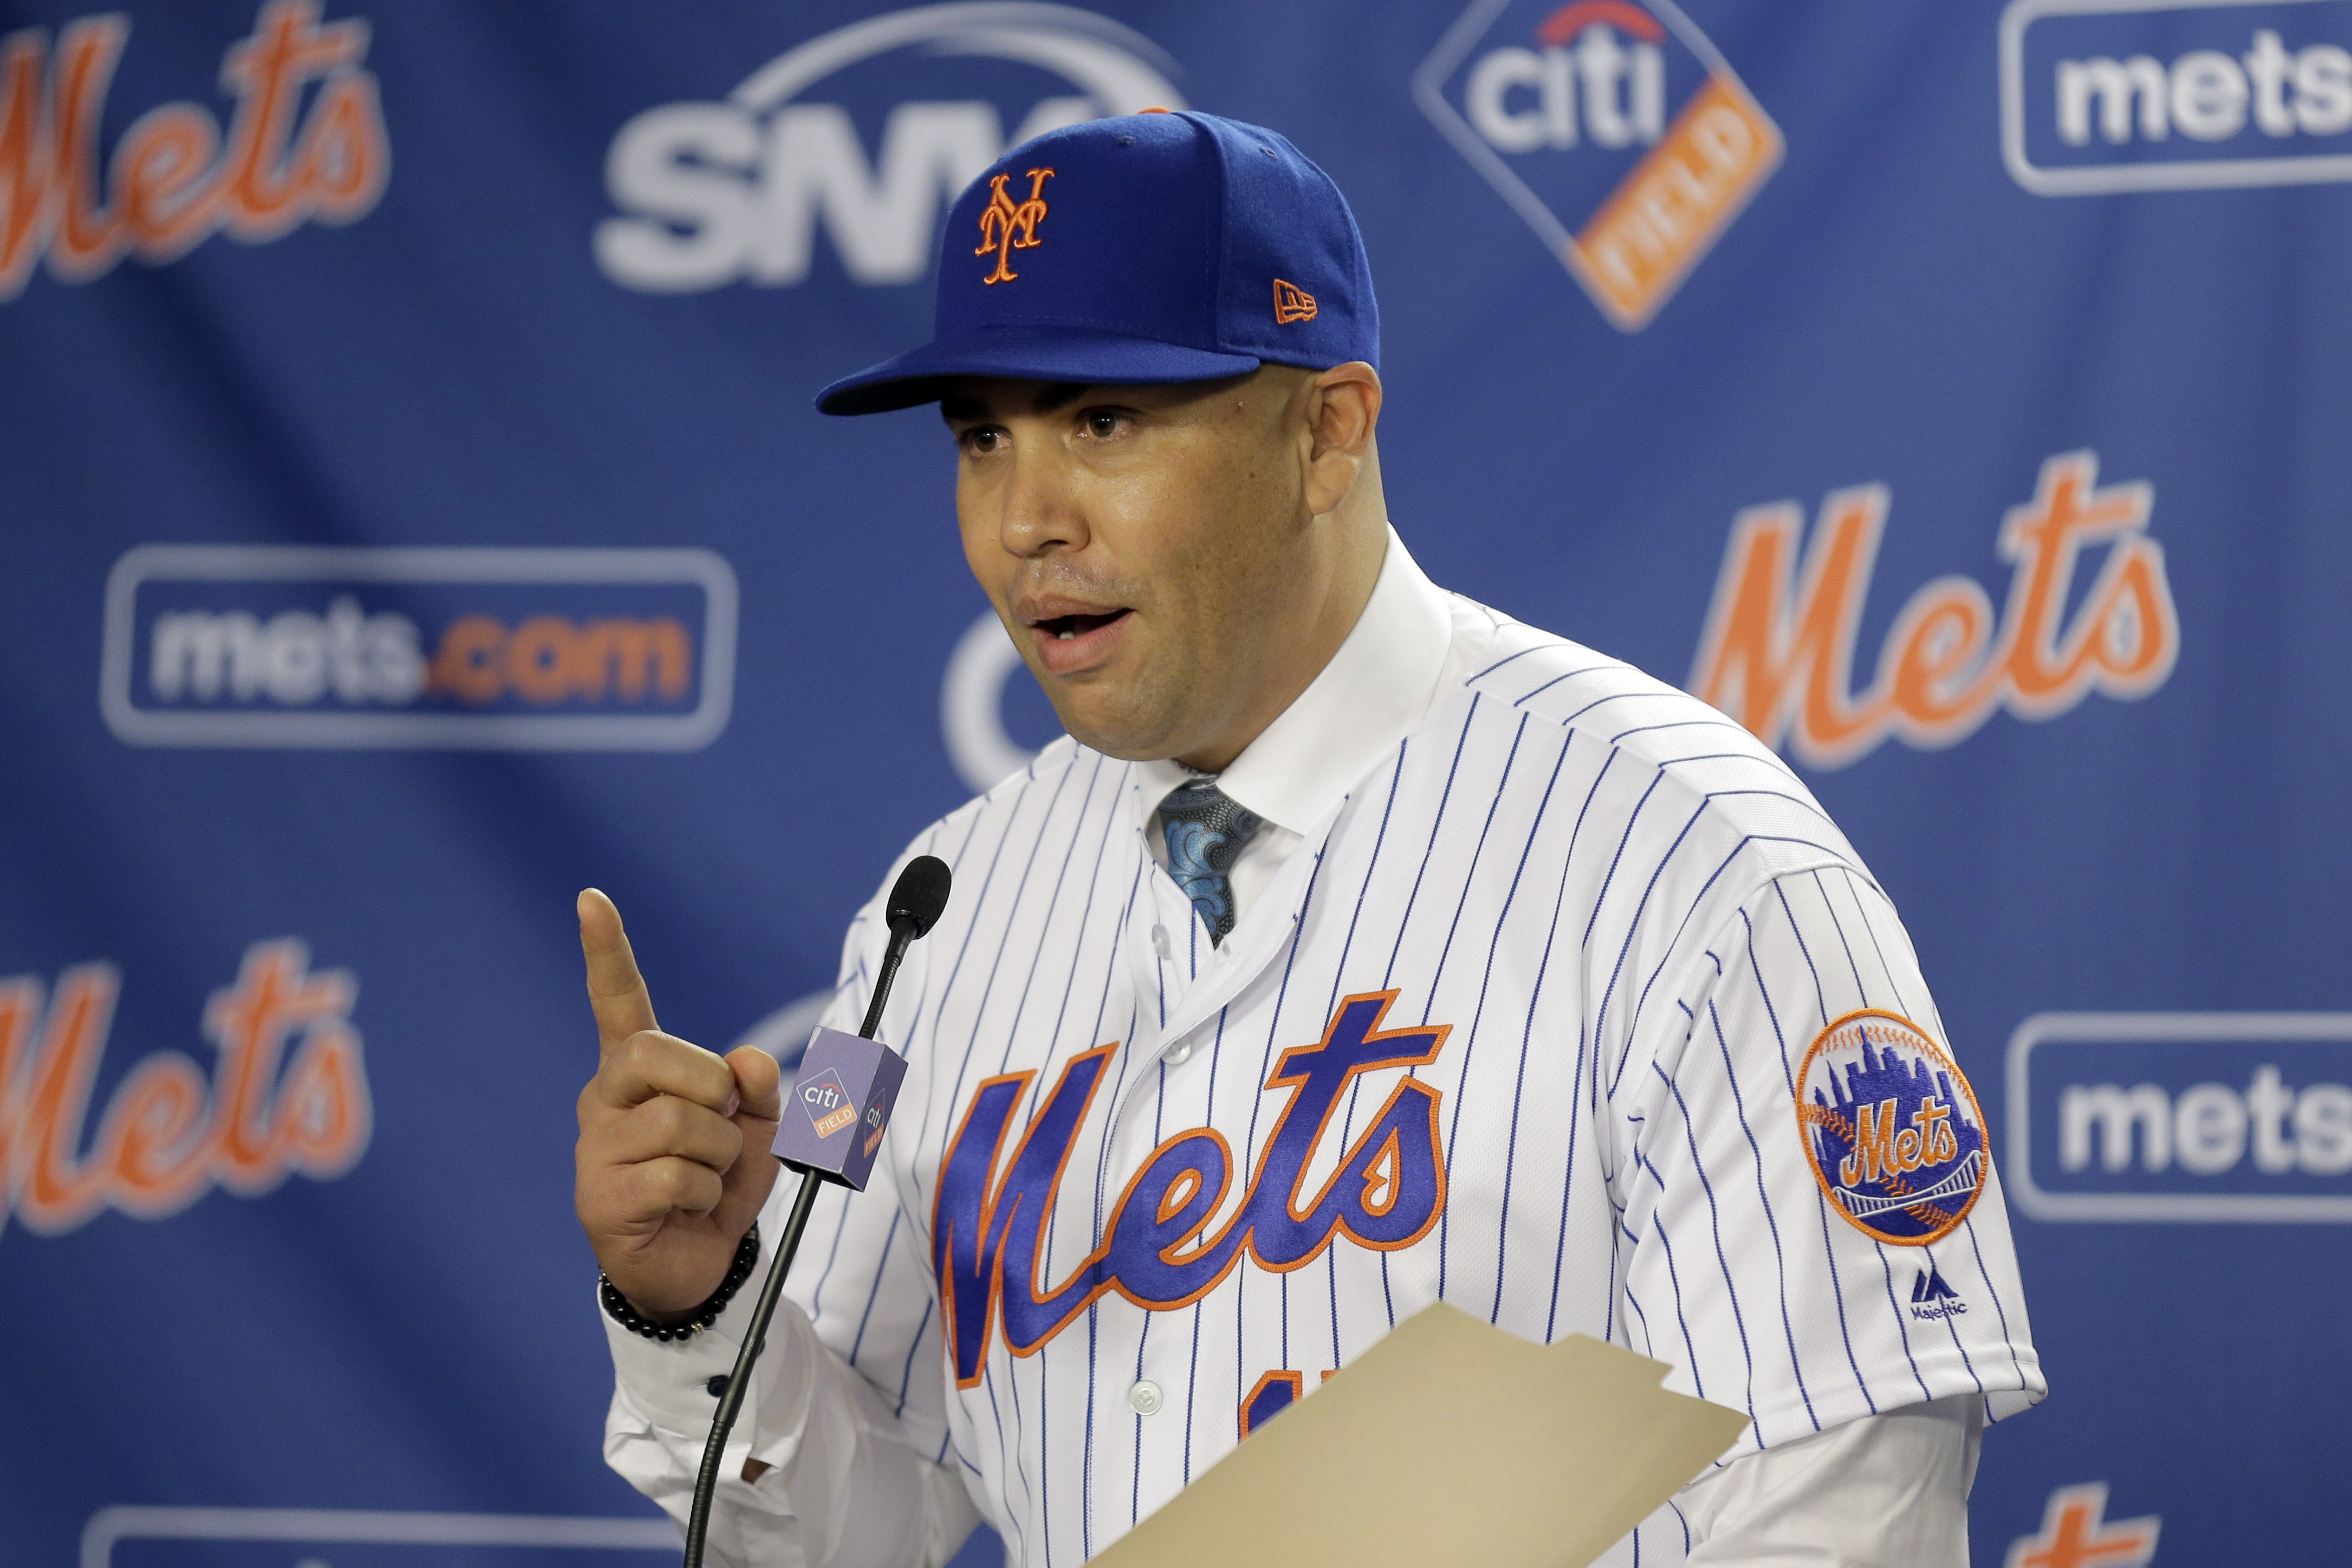 Mets star wants return of ousted former manager after Astros cheating  scandal